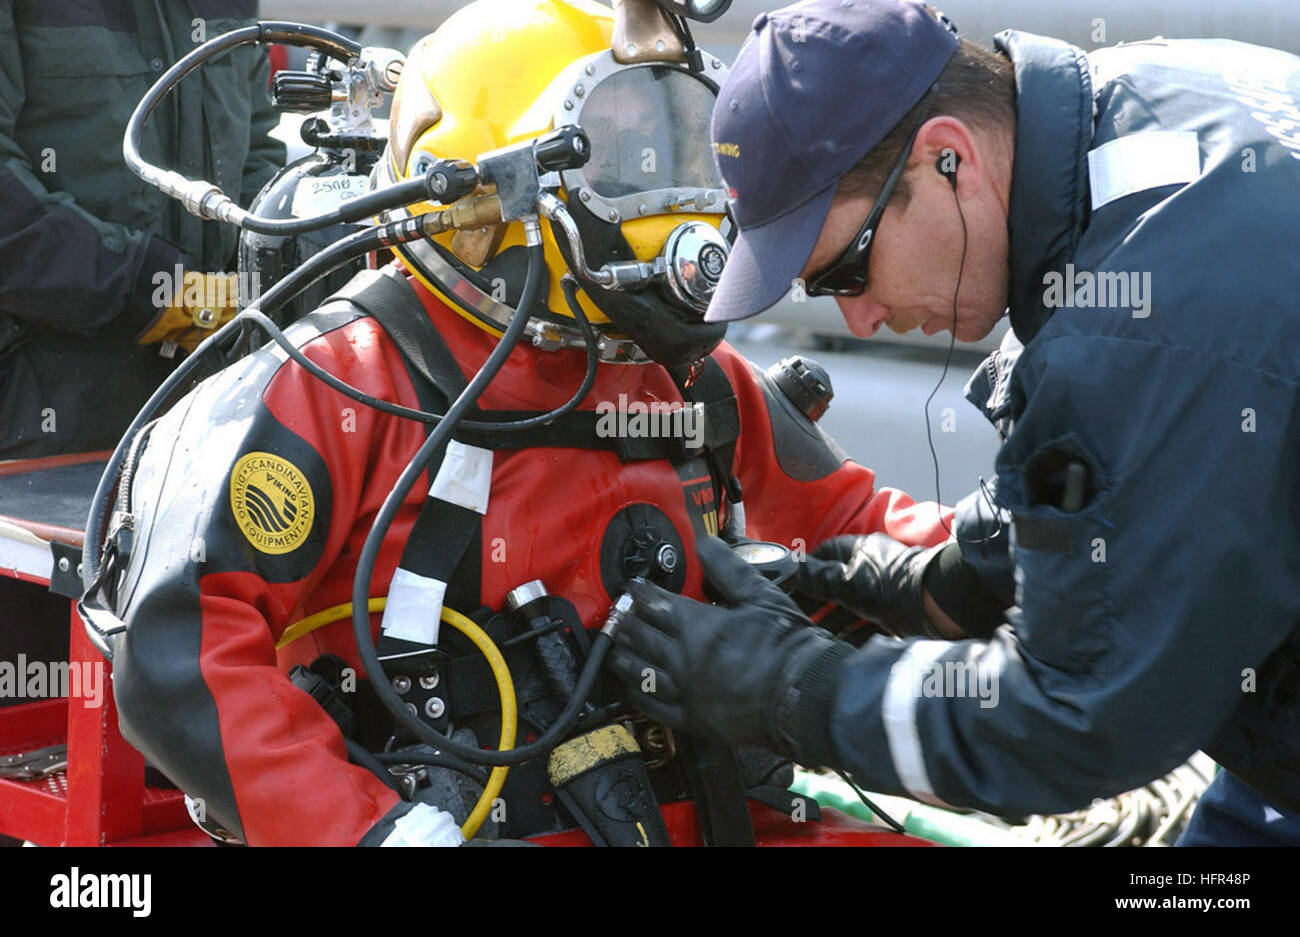 060329-F-3759D-003 Yellow Sea (March 29, 2006) - Chief Hull Technician Cliff Morin assigned to the rescue and salvage ship USS Safeguard (ARS 50) prepares a Safeguard crewmember to dive near the wreckage of a U.S. Air Force F-16C lost at sea on March 14th. Safeguard crews and the Republic of Korea Navy ship ROKS Pyong Taek (ATS 27) took on the real-world salvage effort off the coast of Kunsan Air Base as part of salvage exercise (SALVEX 06). U.S. Air Force photo by Senior Airman Joshua L. DeMotts (RELEASED) US Navy 060329-F-3759D-003 Chief Hull Technician Cliff Morin assigned to the rescue and Stock Photo